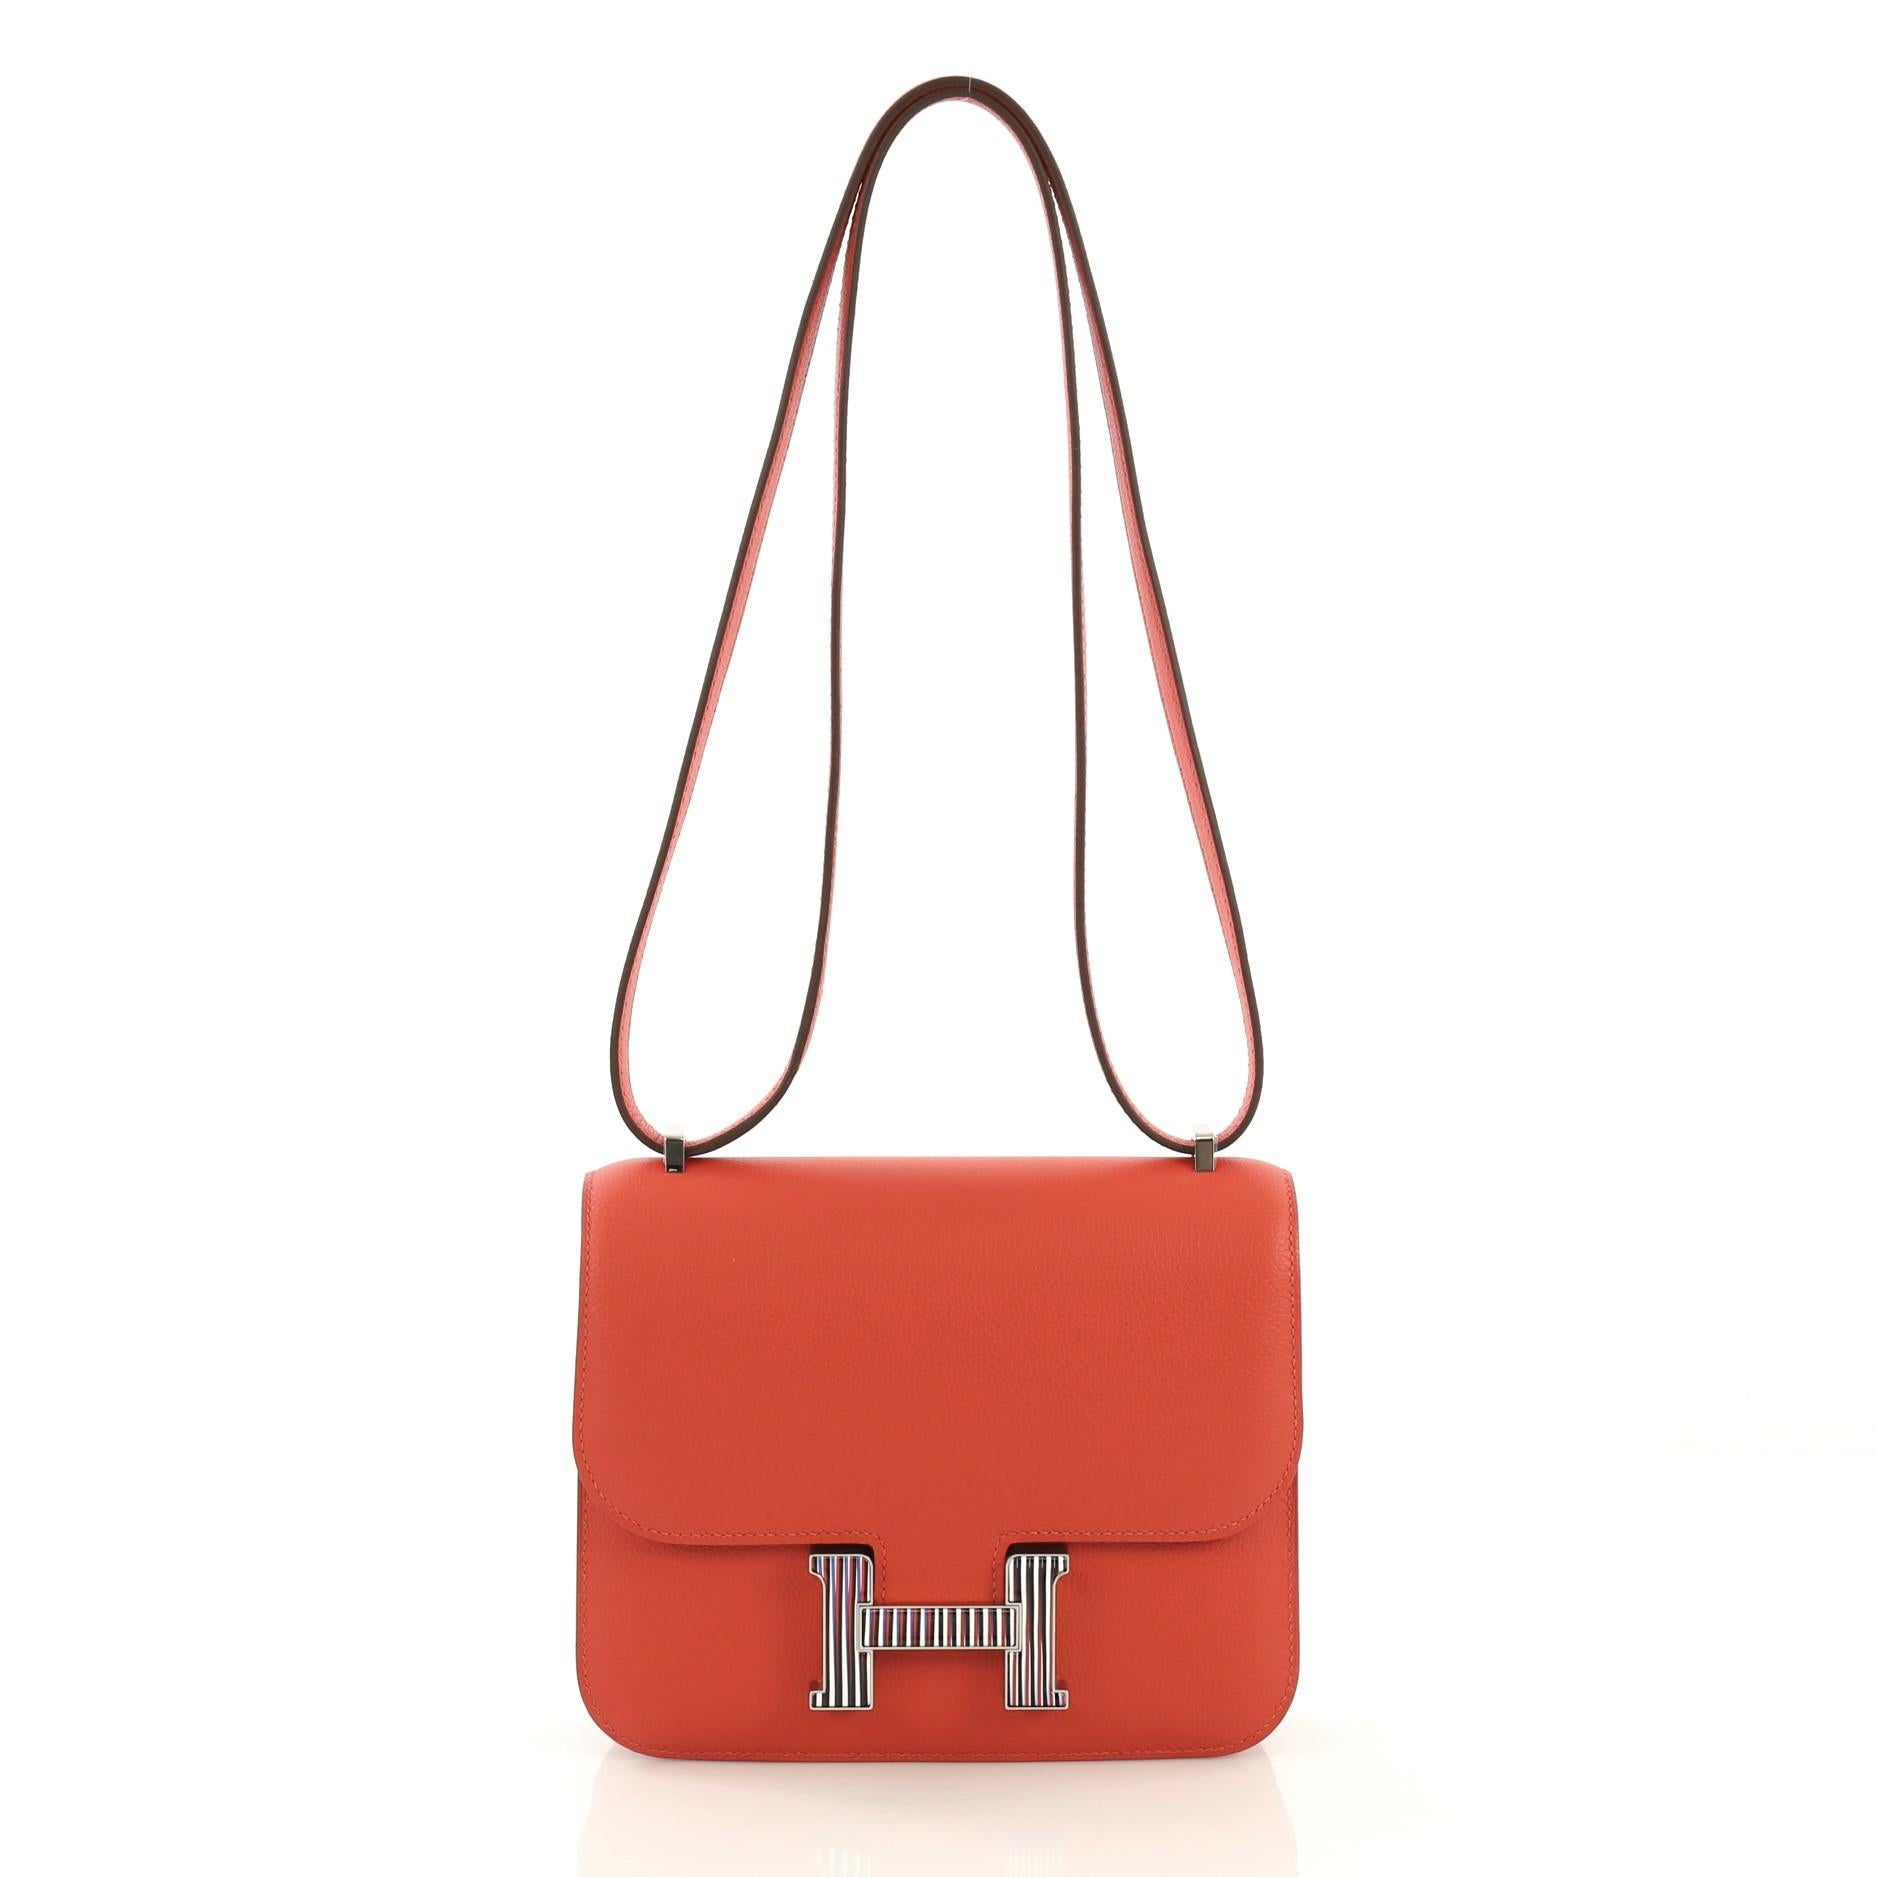 This Hermes Constance Optique Handbag Evercolor 18, crafted from Capucine red Evercolor leather, features flat leather strap, frontal flap, and enamel optique hardware. Its push-lock closure opens to a Capucine red Agneau leather interior with two